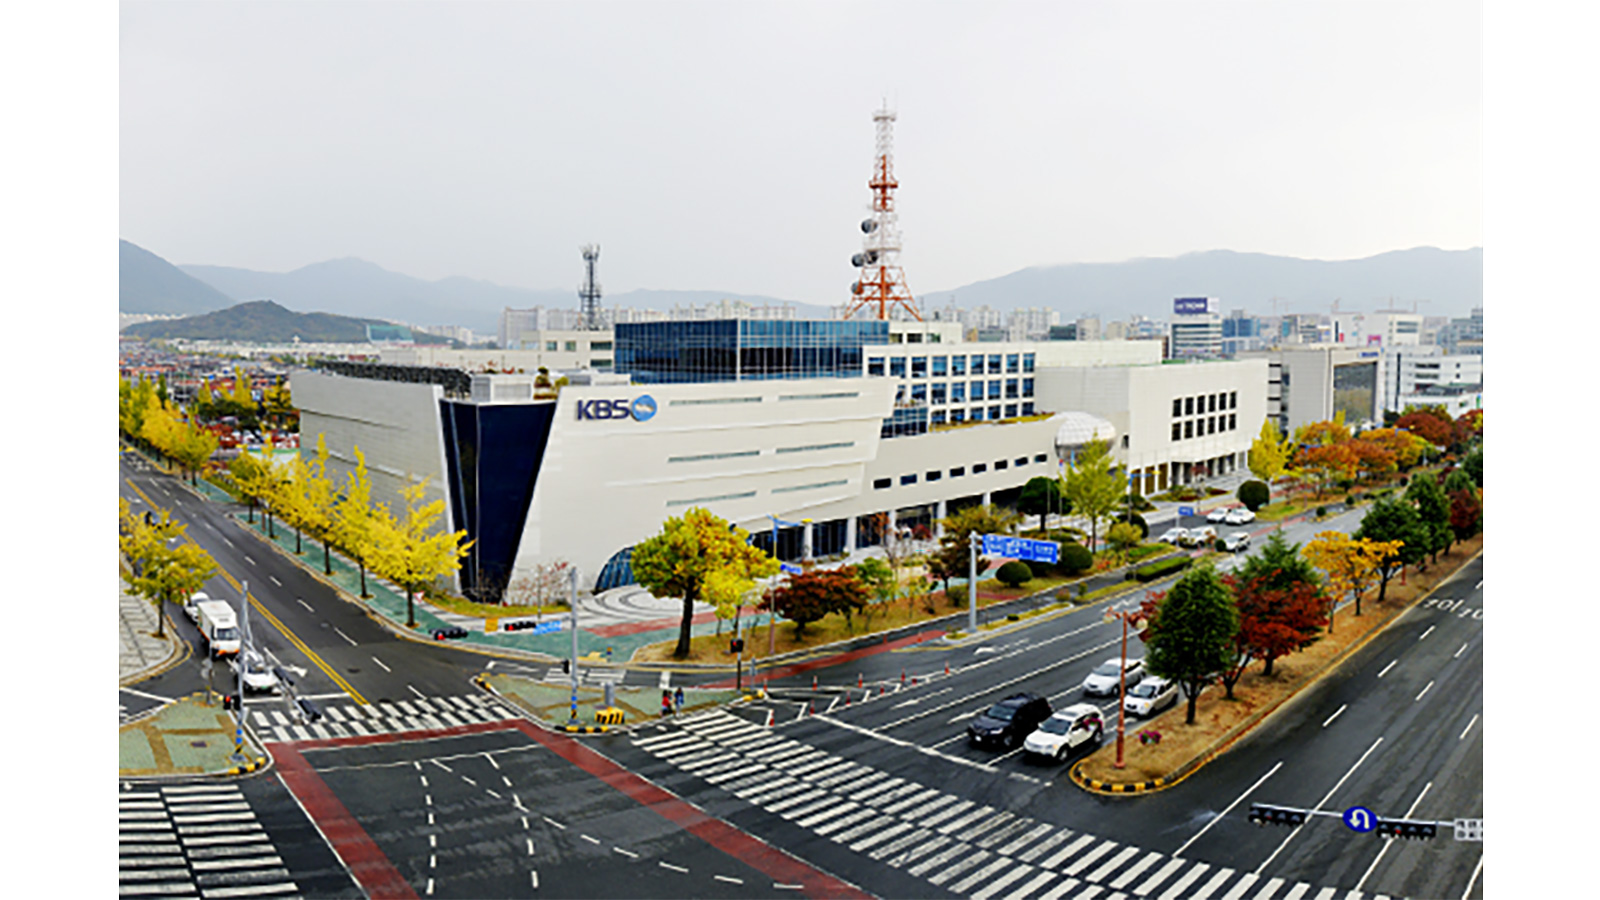 KBS Changwon Broadcasting Branch Office